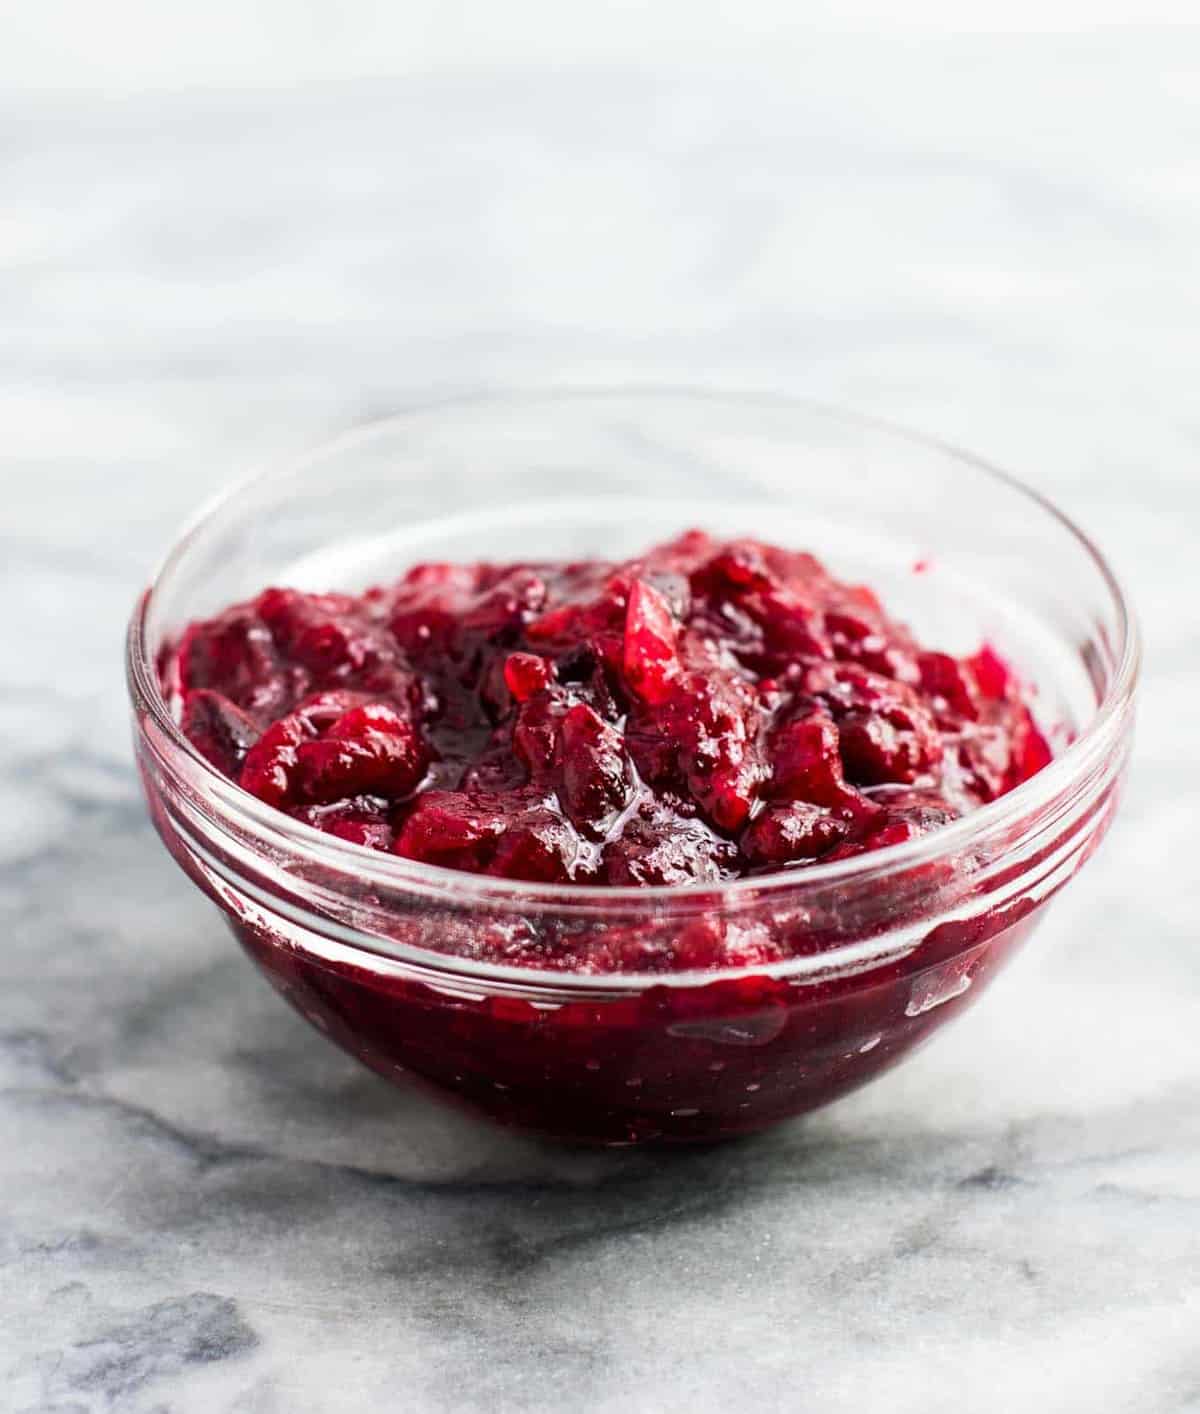 fresh cranberry recipes - Healthy cranberry sauce recipe (vegan). Only 3 ingredients and low sugar. The best cranberry sauce I have ever had! We make this every year. #cranberrysauce #thanksgiving #vegan #vegetarian #healthycranberrysauce #freshcranberries